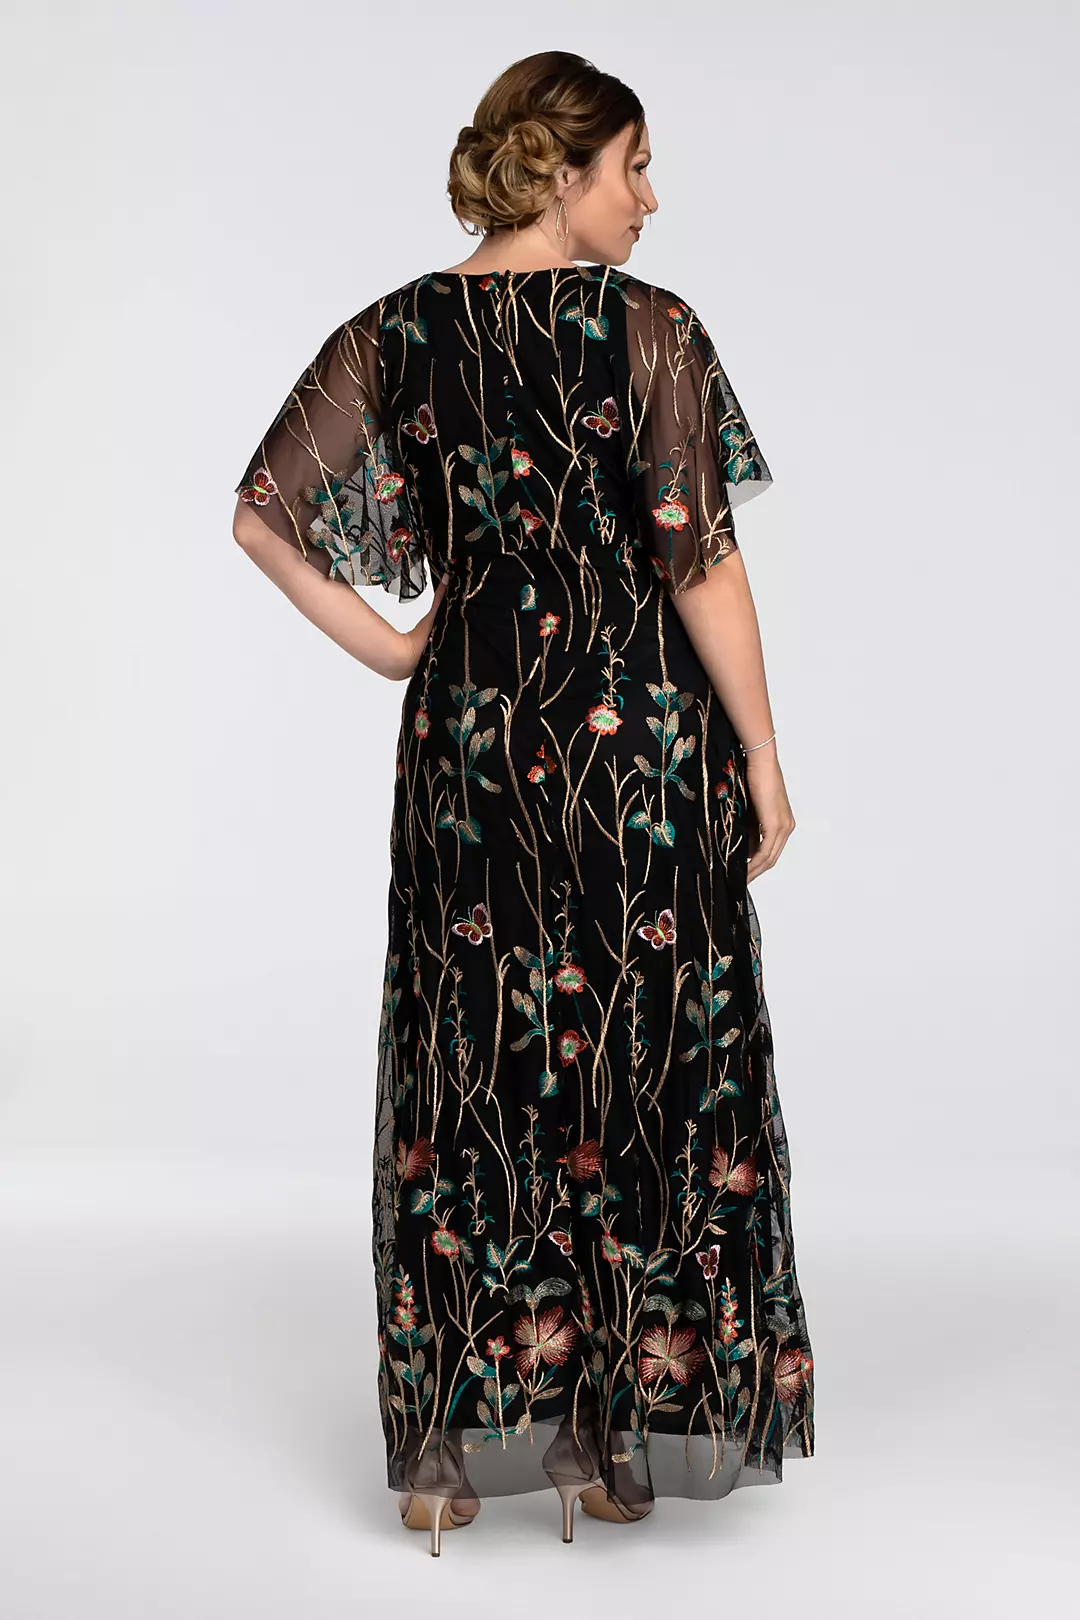 Embroidered Elegance Plus Size Floral Evening Gown